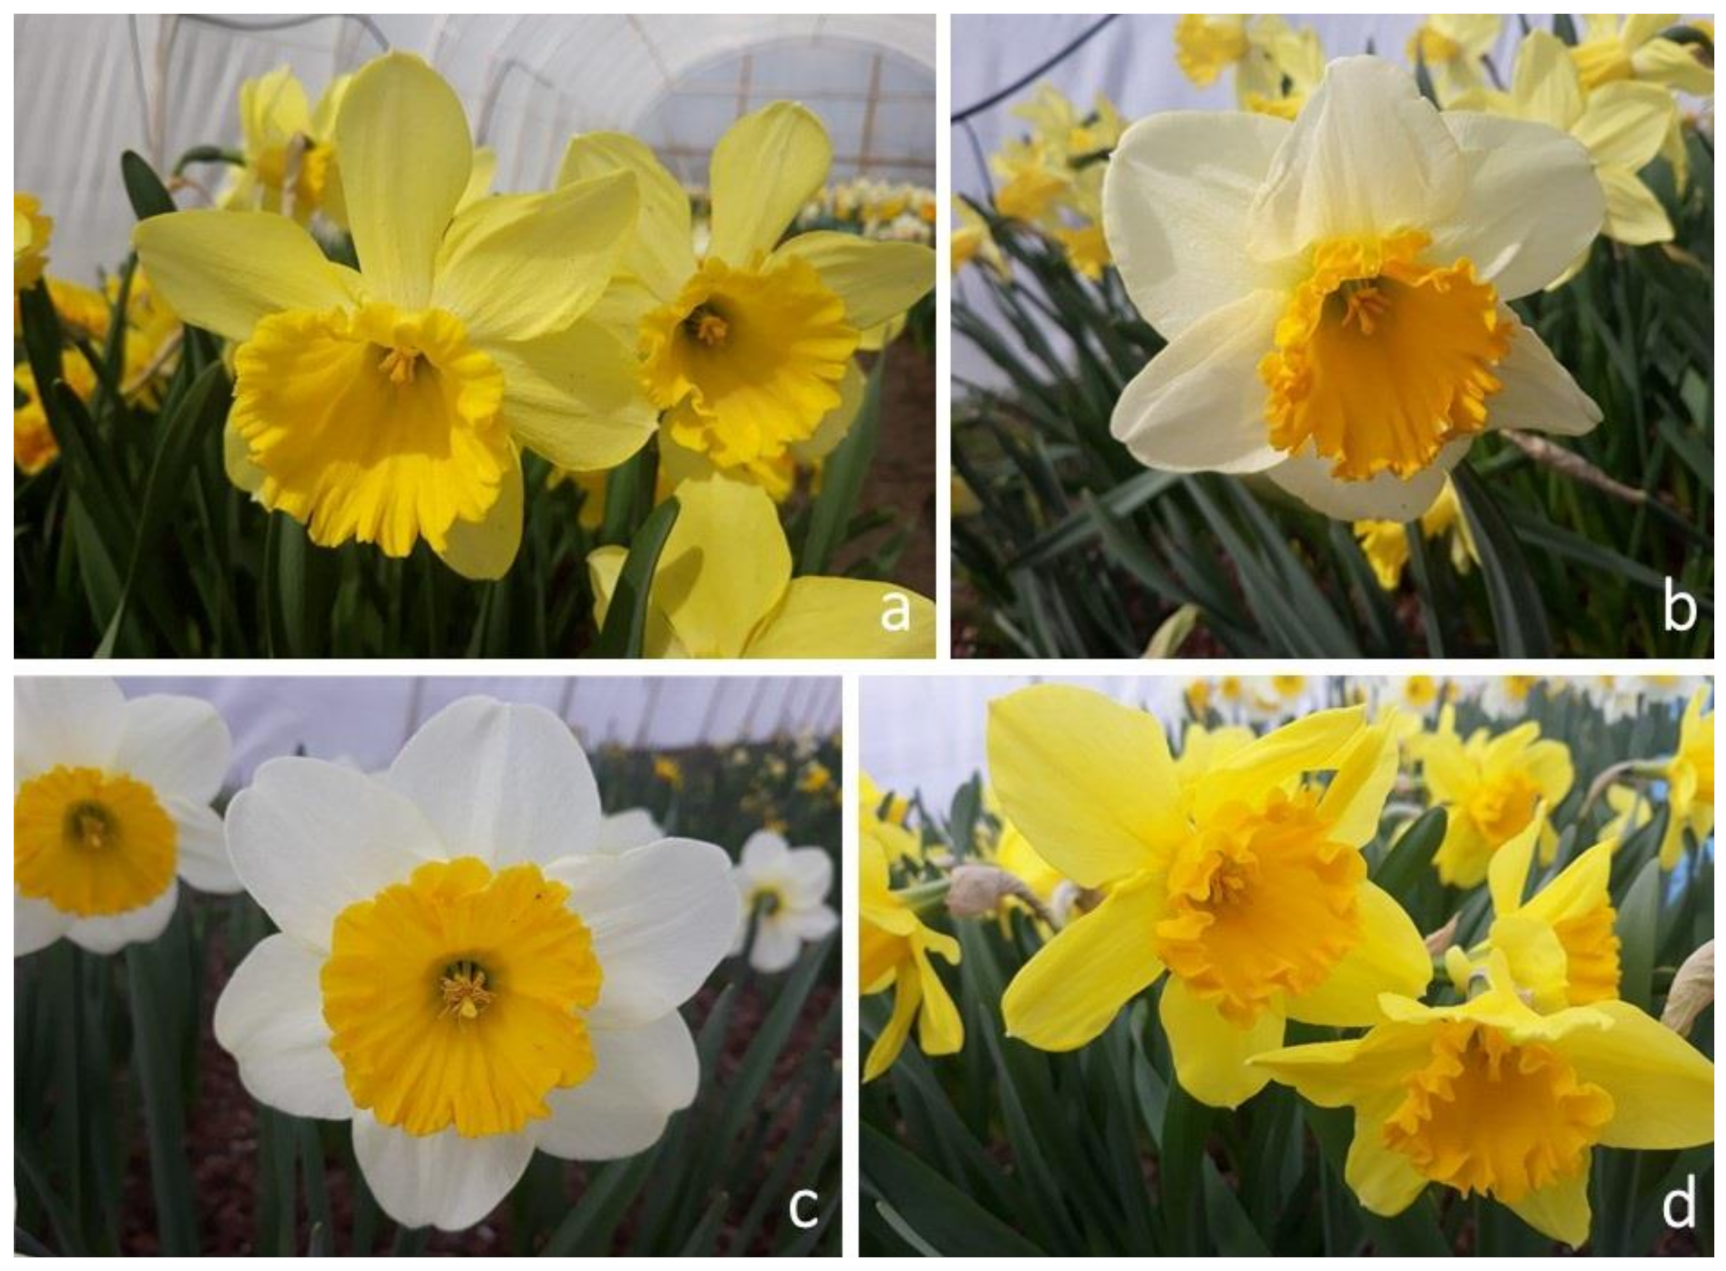 Agronomy Free Full-Text Breeding Aspects of Selected Ornamental Bulbous Crops pic